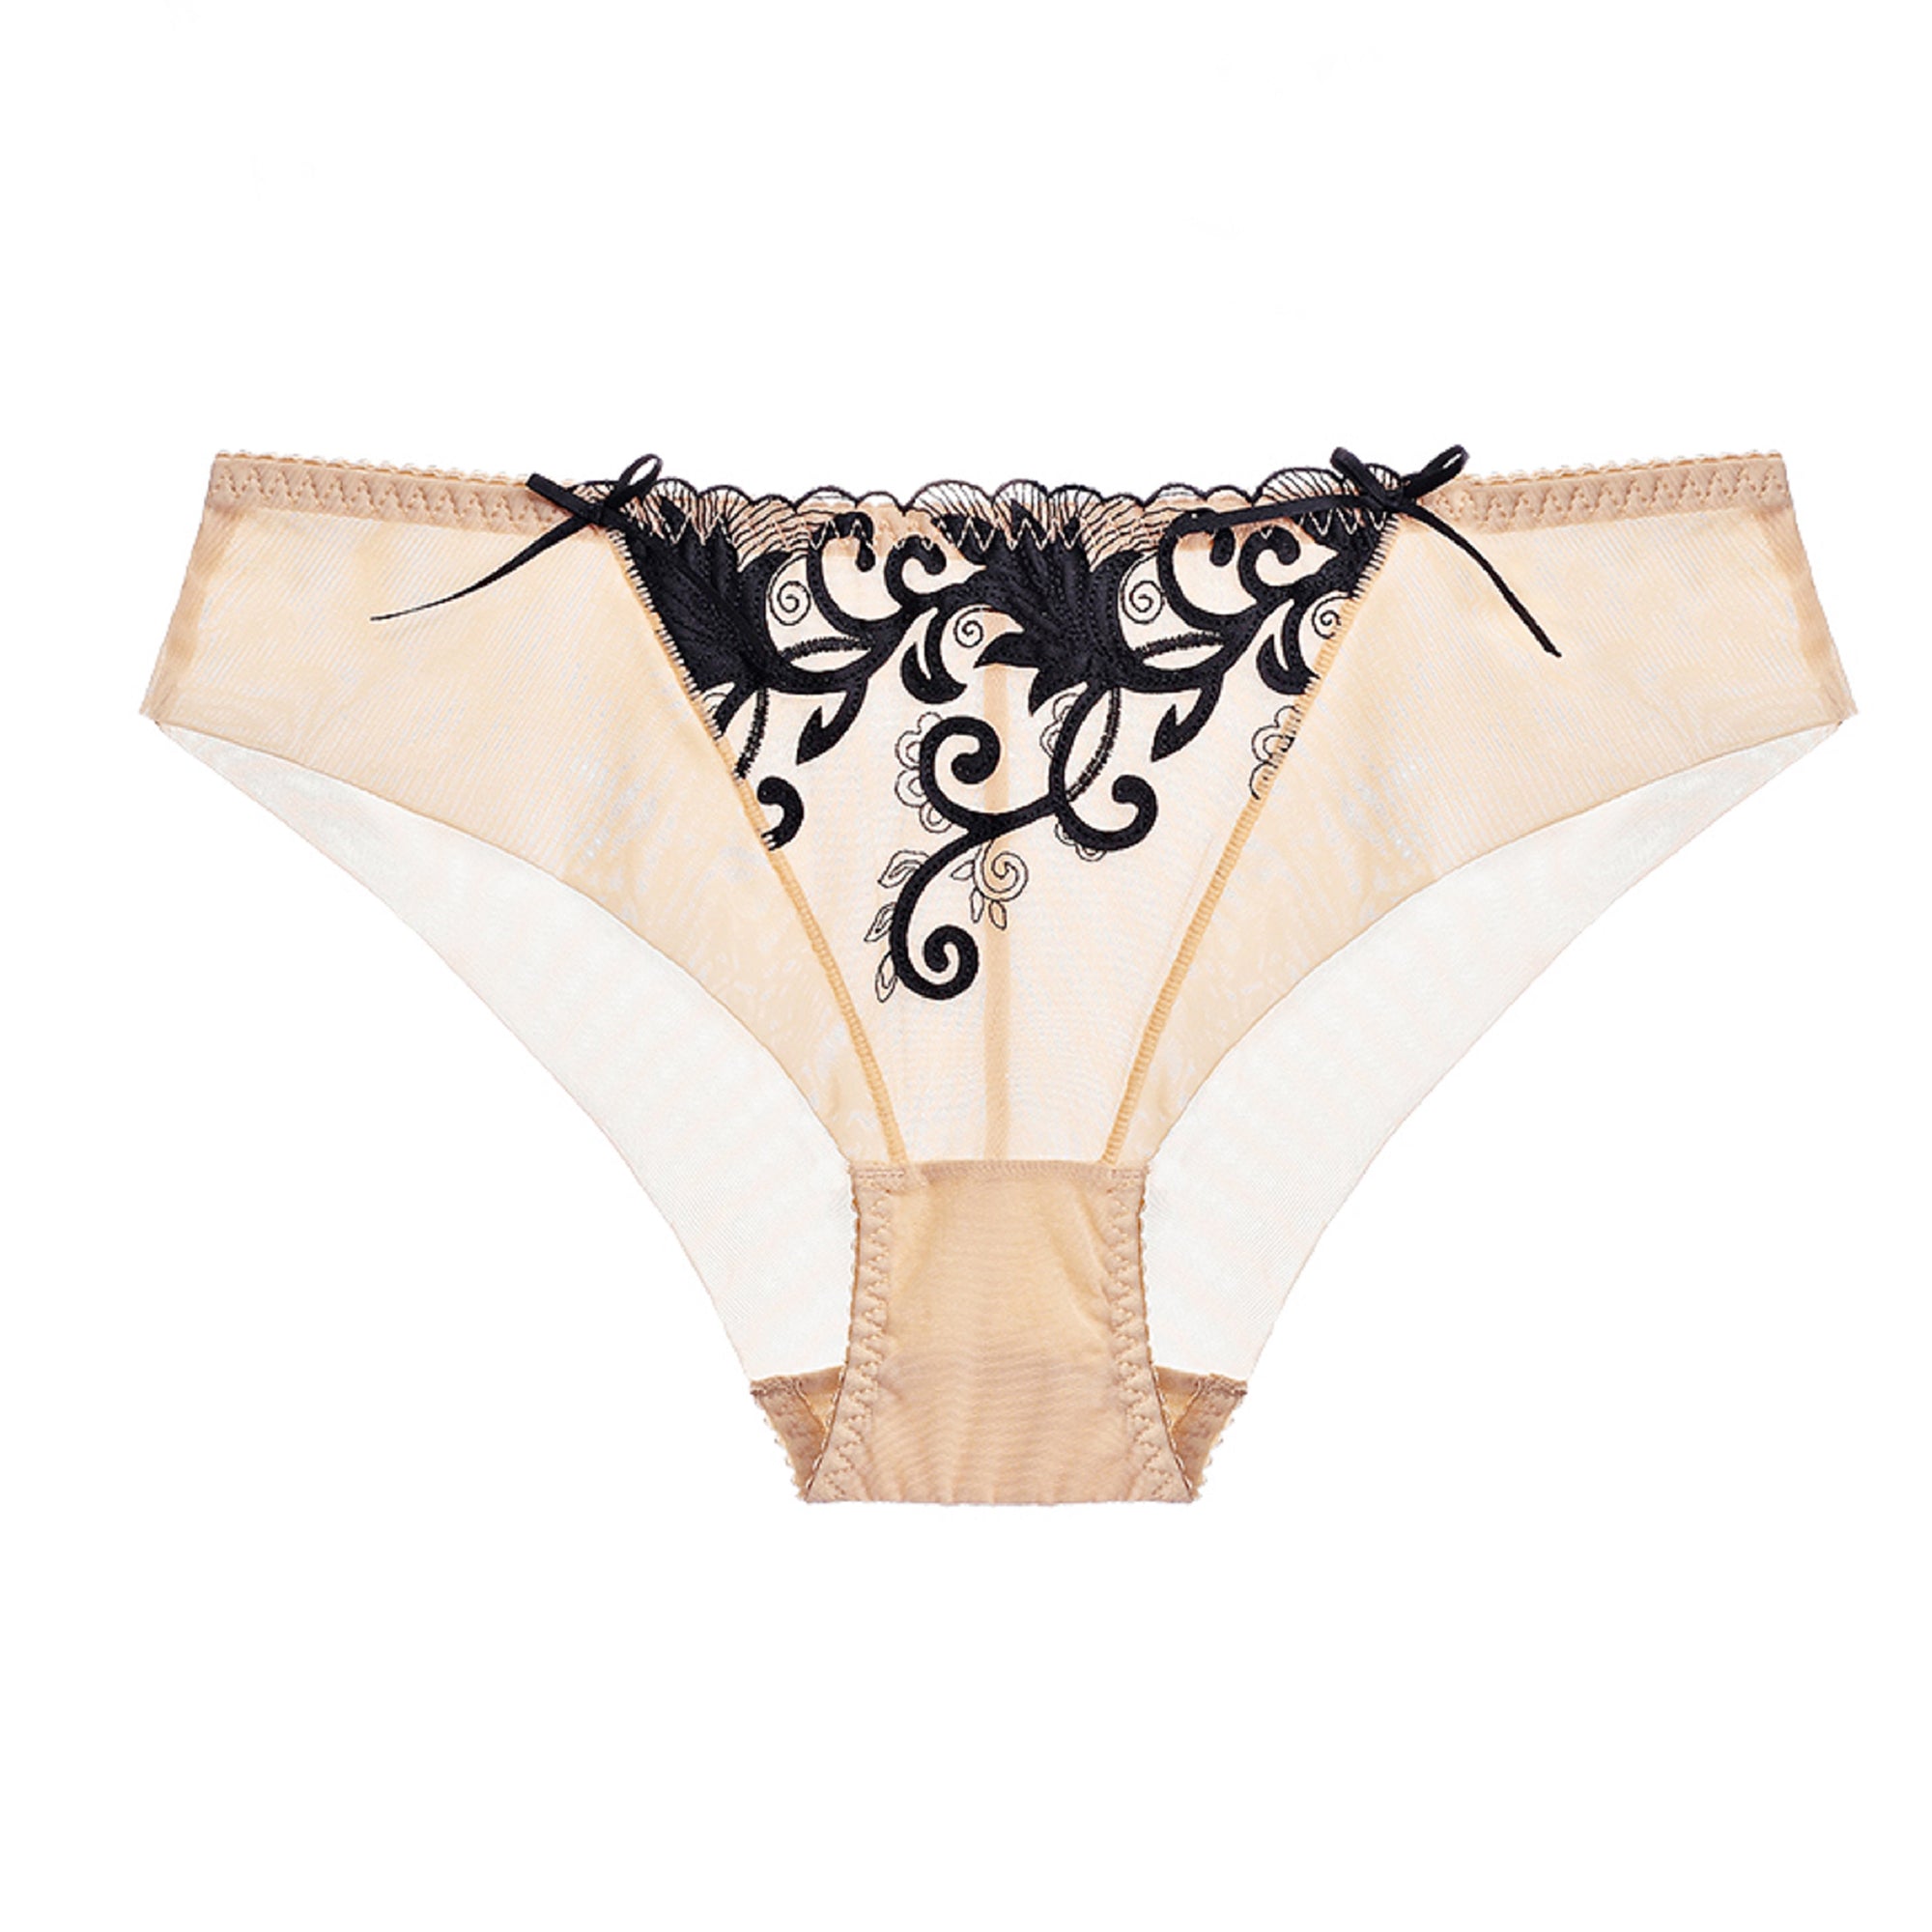 Sexy Apricot Flower Embroidery Lingerie Panty